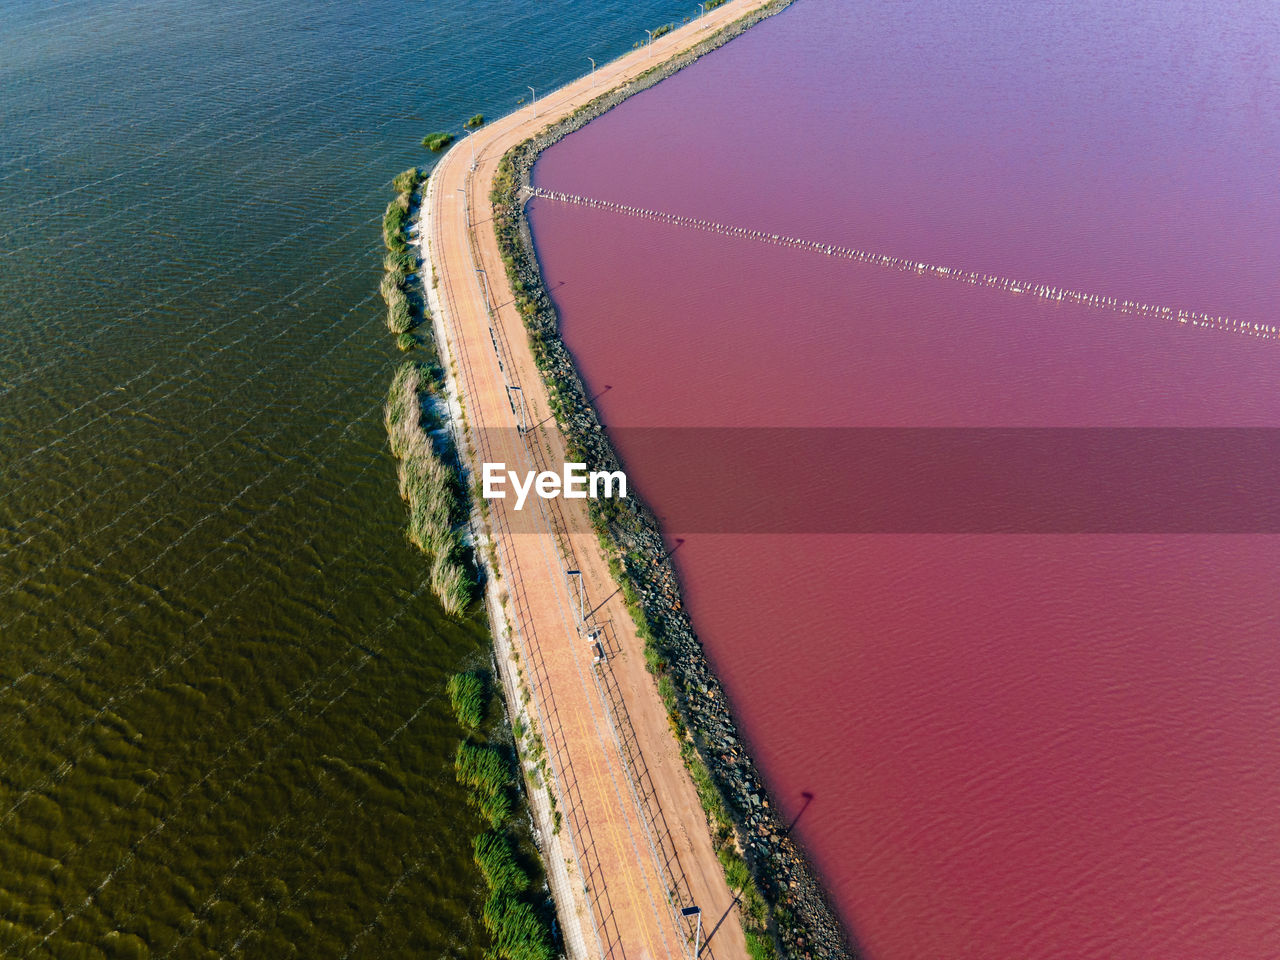 Road that separates the pink salt lake and the black sea view from the drone